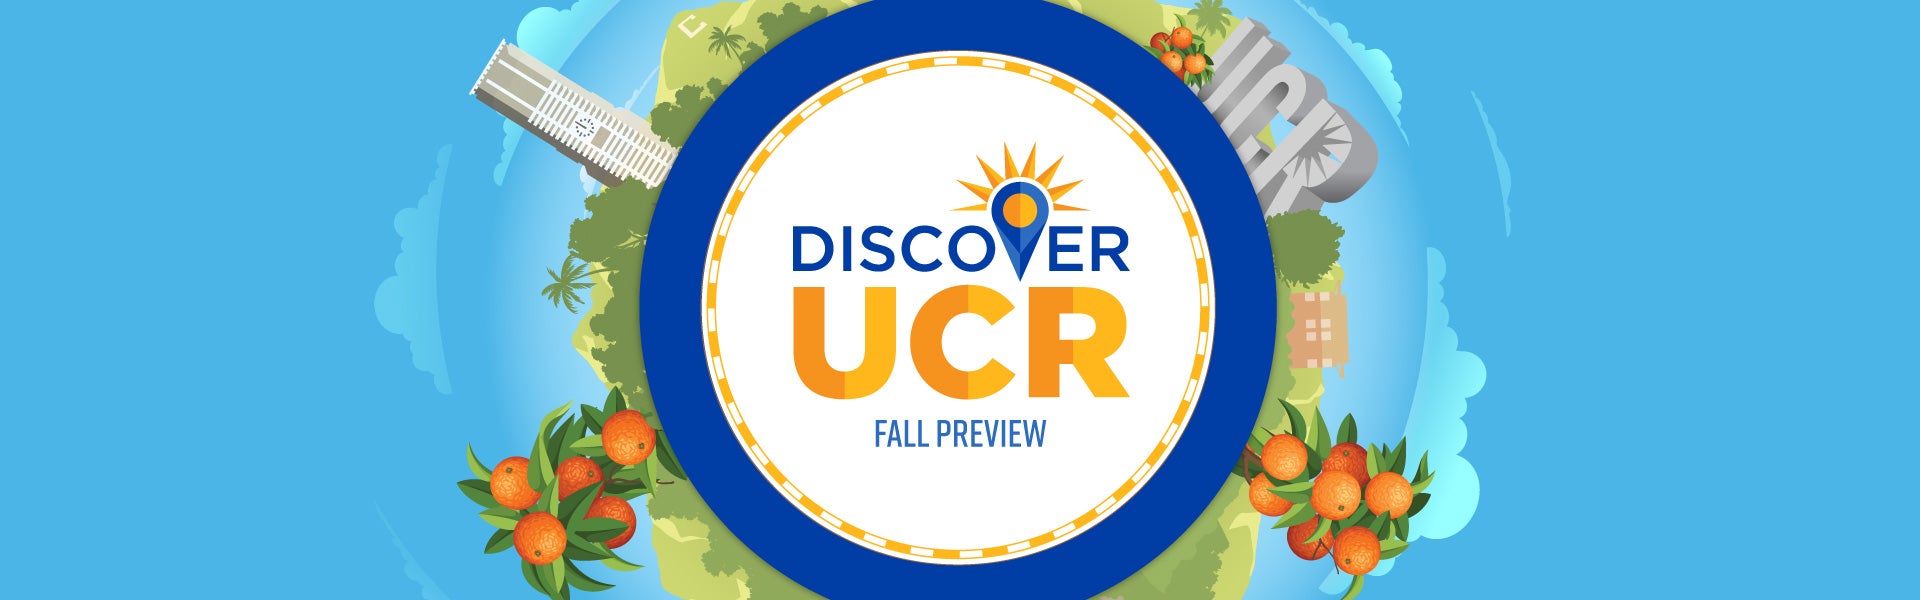 Web banner graphic illustration promoting Discover UCR, an open house event hosted by UC Riverside for prospective first-year and transfer students.